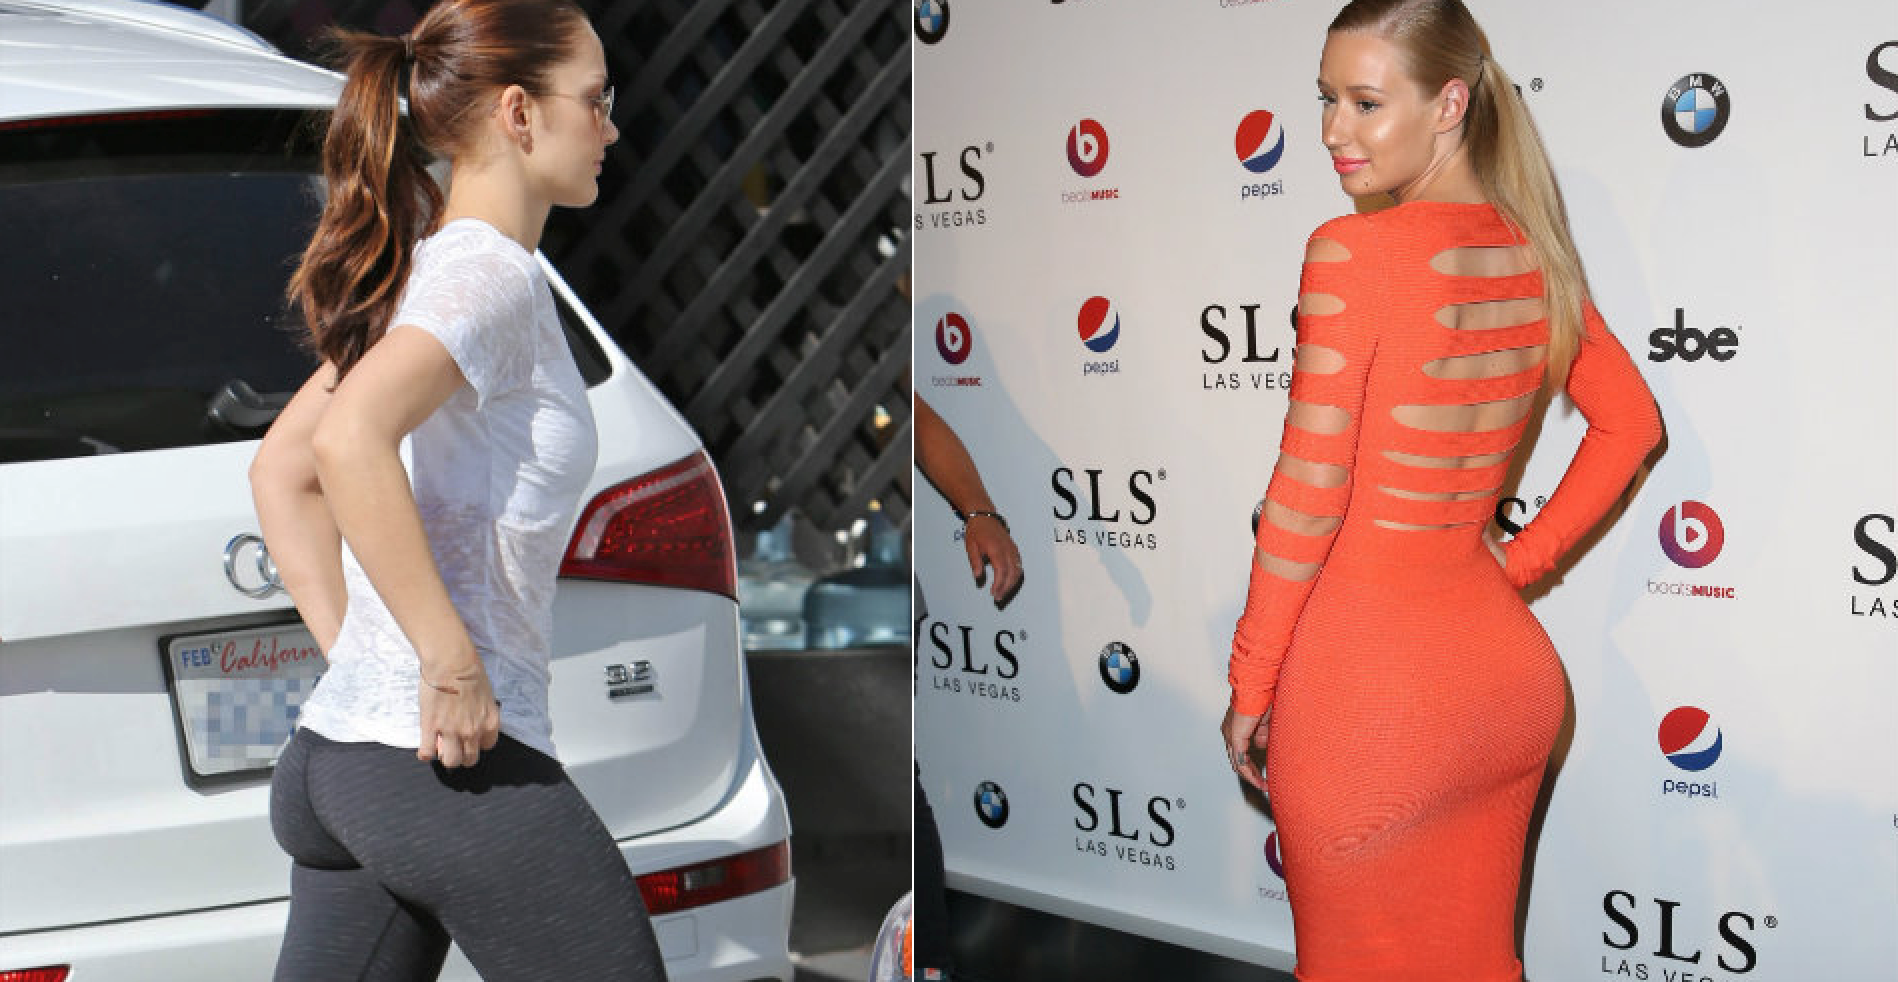 Iggy Azalea shows off her shapely derriere in skintight yoga pants